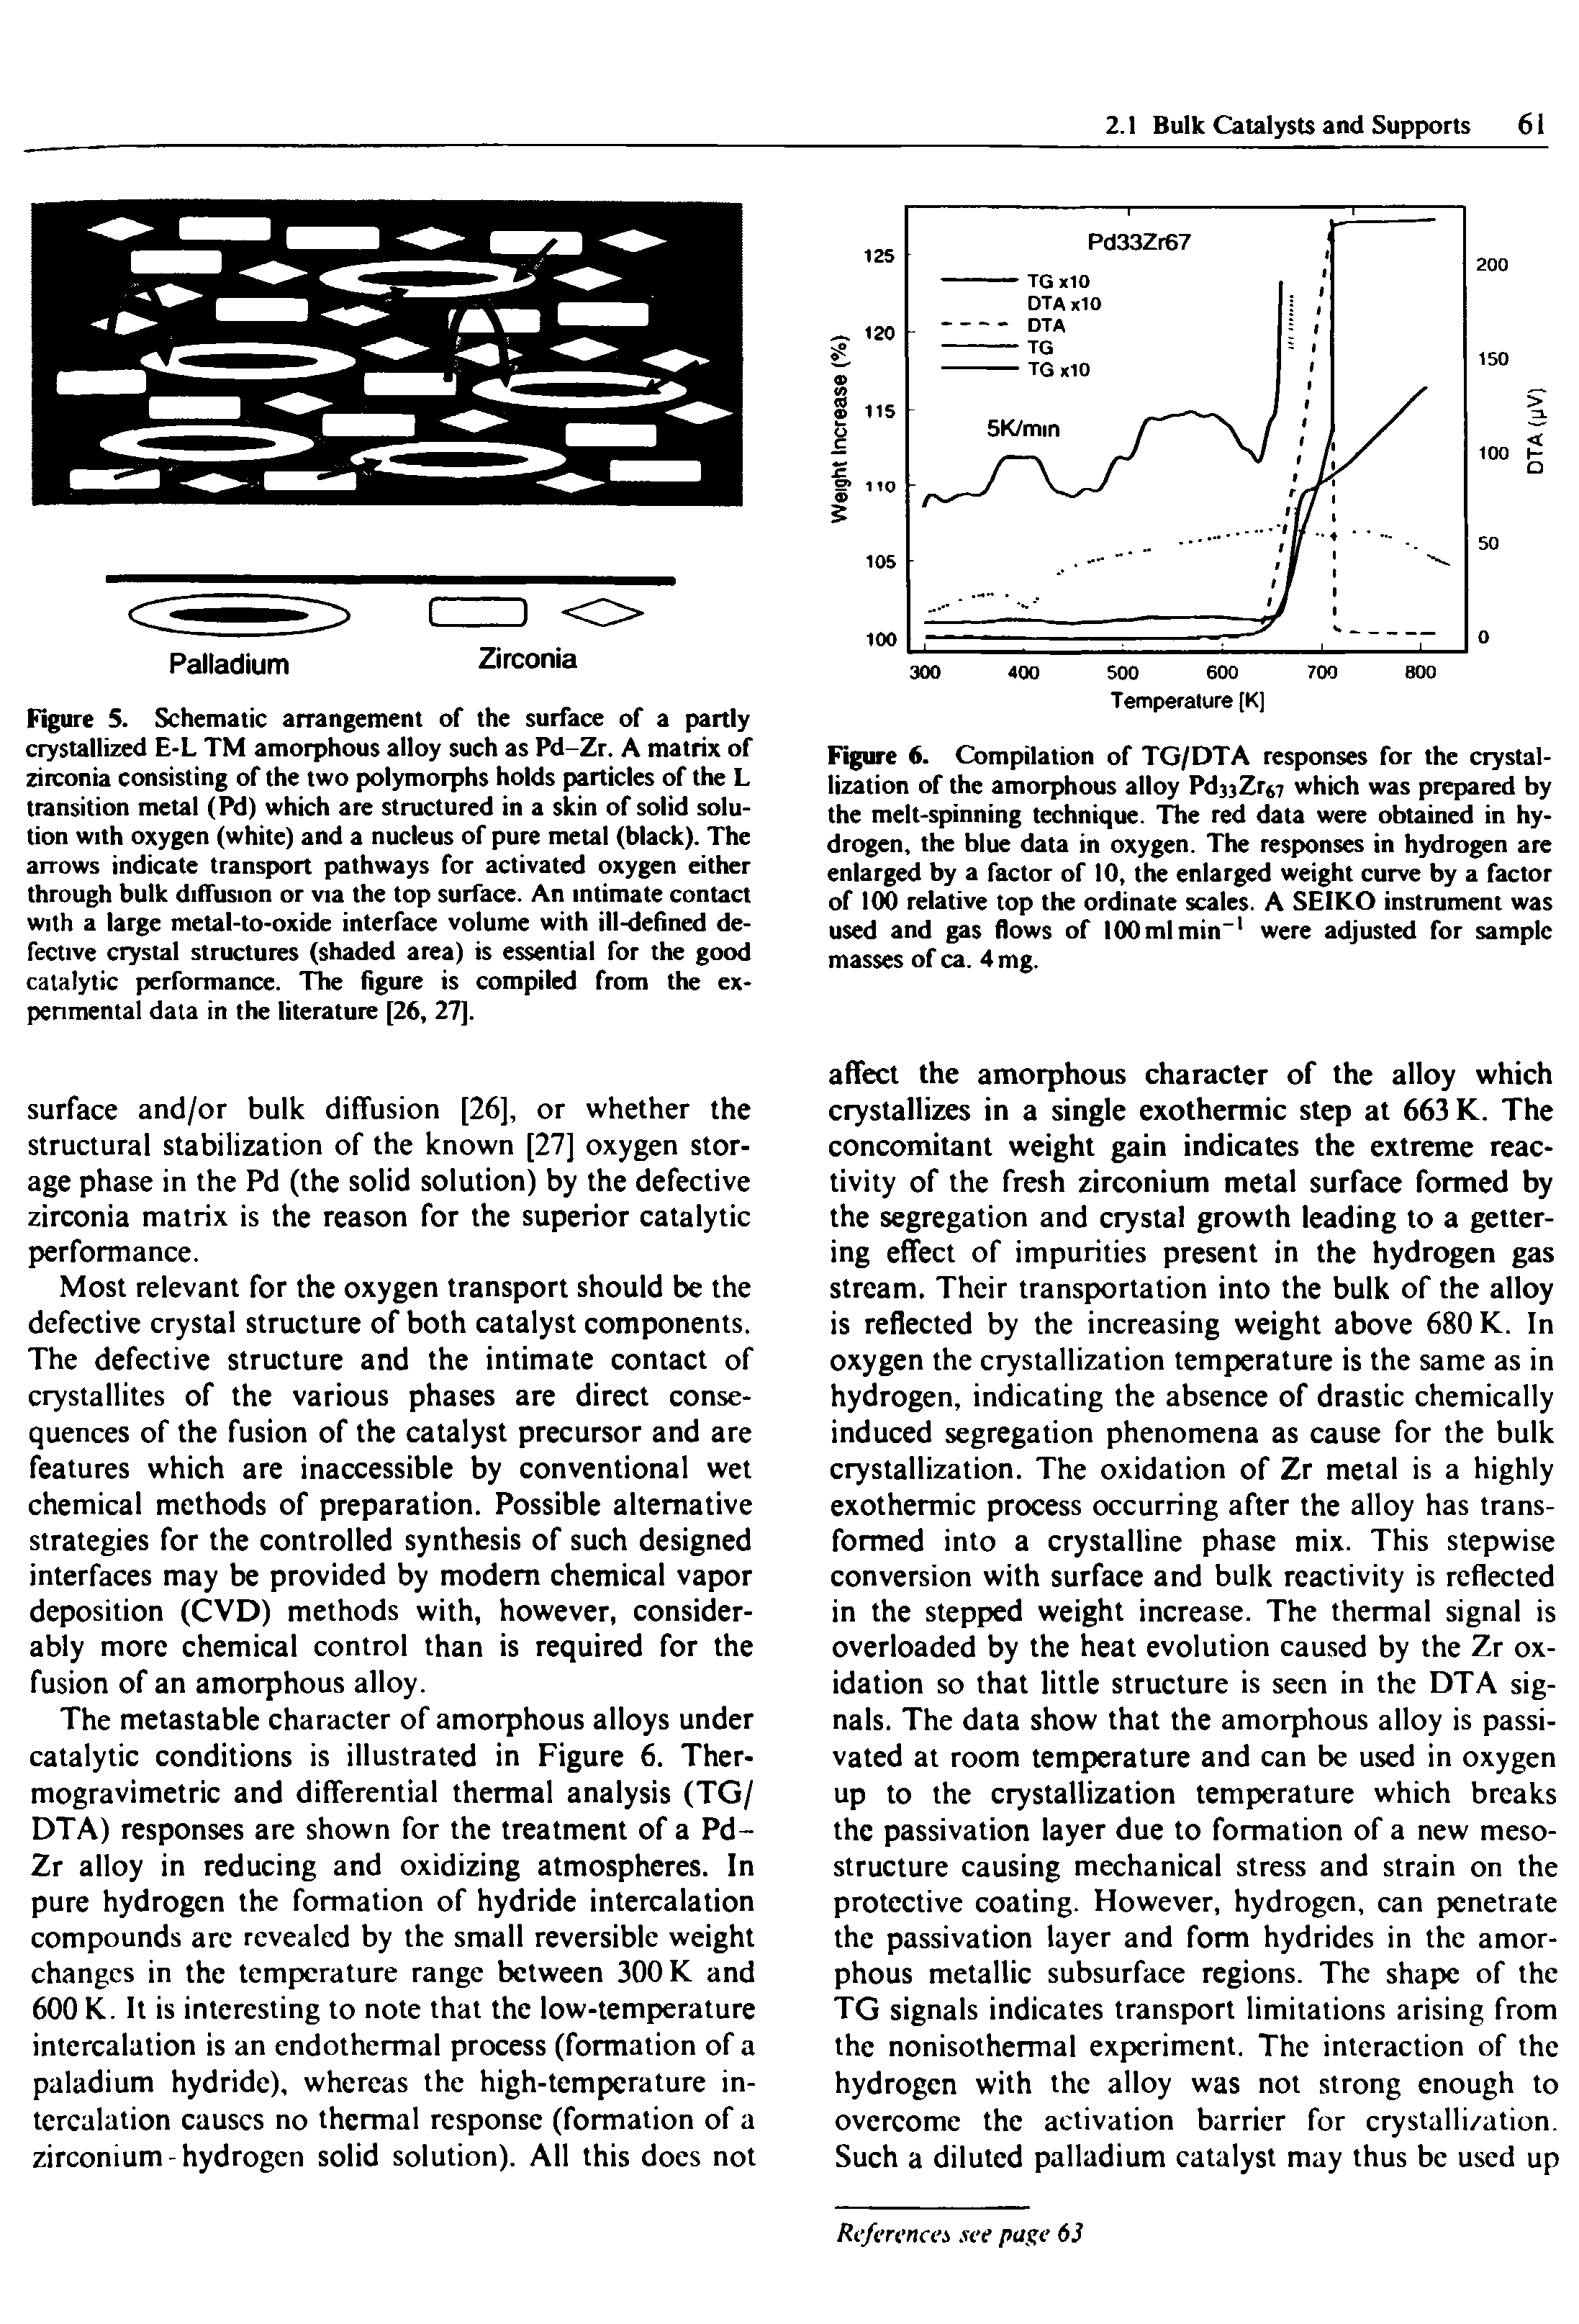 Figure 6. Compilation of TG/DTA responses for the crystallization of the amorphous alloy PdjjZr which was prepared by the melt-spinning technique. The red data were obtained in hydrogen, the blue data in oxygen. The responses in hydrogen are enlarged by a factor of 10, the enlarged weight curve by a factor of 100 relative top the ordinate scales. A SEIKO instrument was used and gas flows of lOOmlmin-1 were adjusted for sample masses of ca. 4 mg.